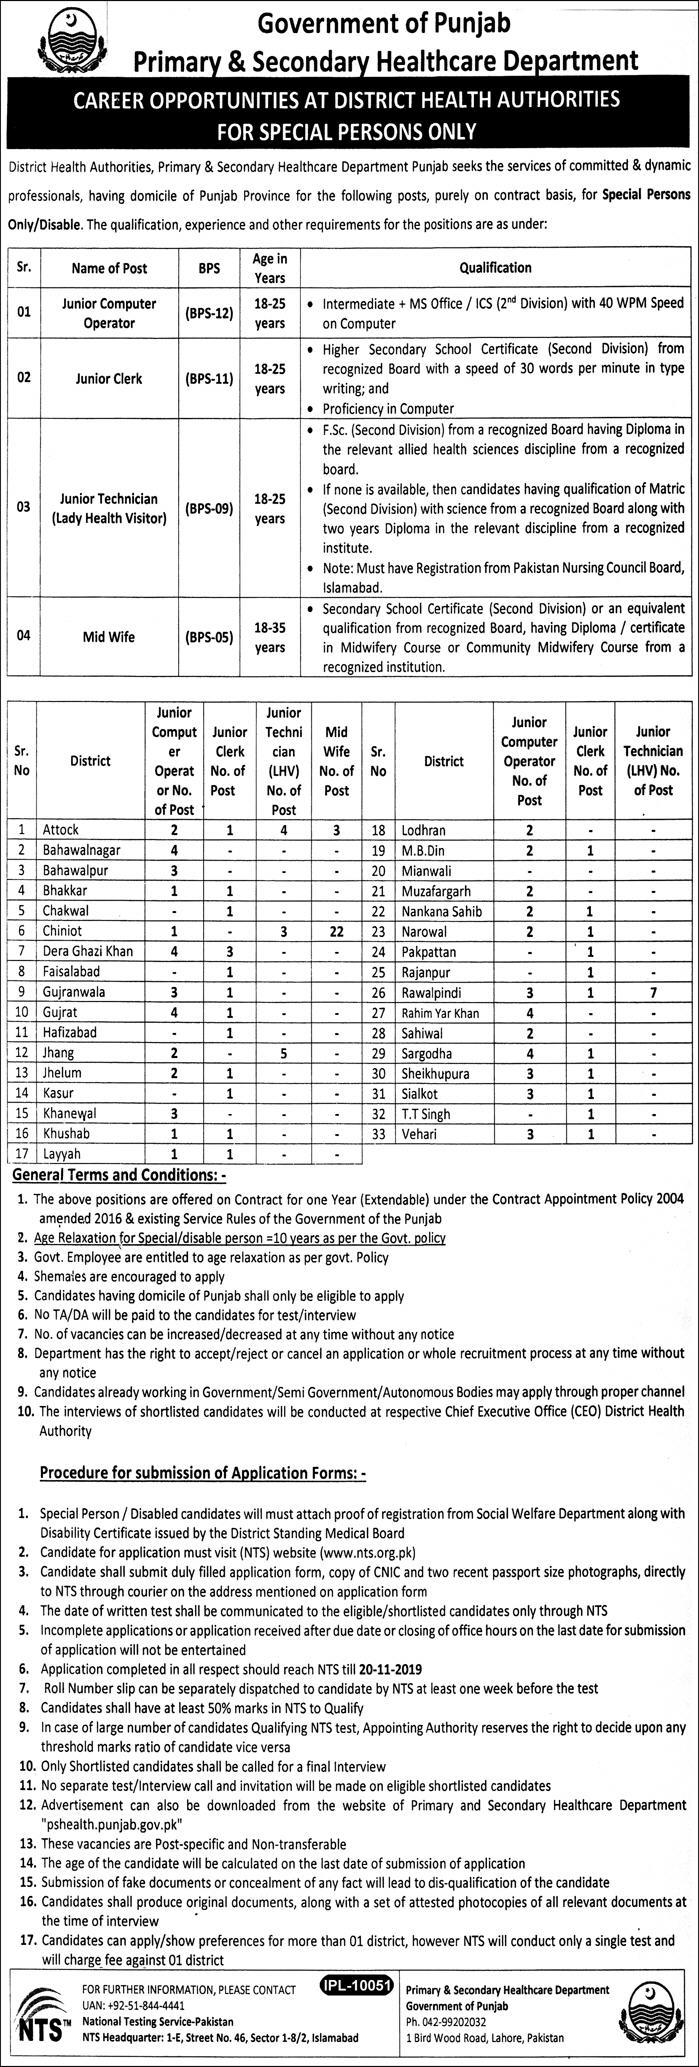 Career Opportunities at District Health Authorities